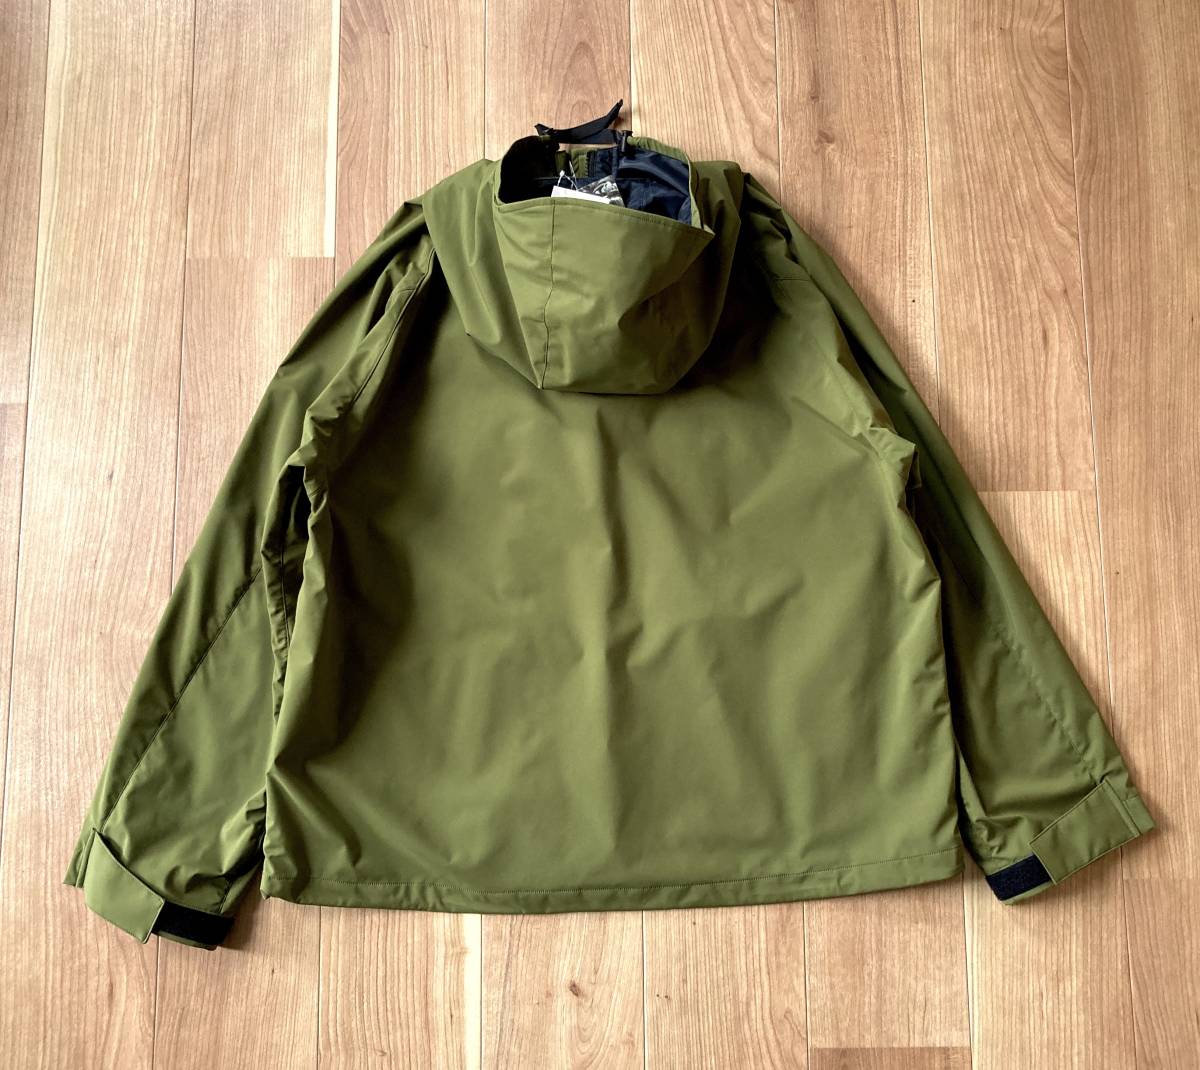 6.5 ten thousand * special order / marka × WILD THINGS for EDIFICE / ECWCS JACKET / OLIVE / 3 /ma-ka Wild Things Edifice jacket hood 